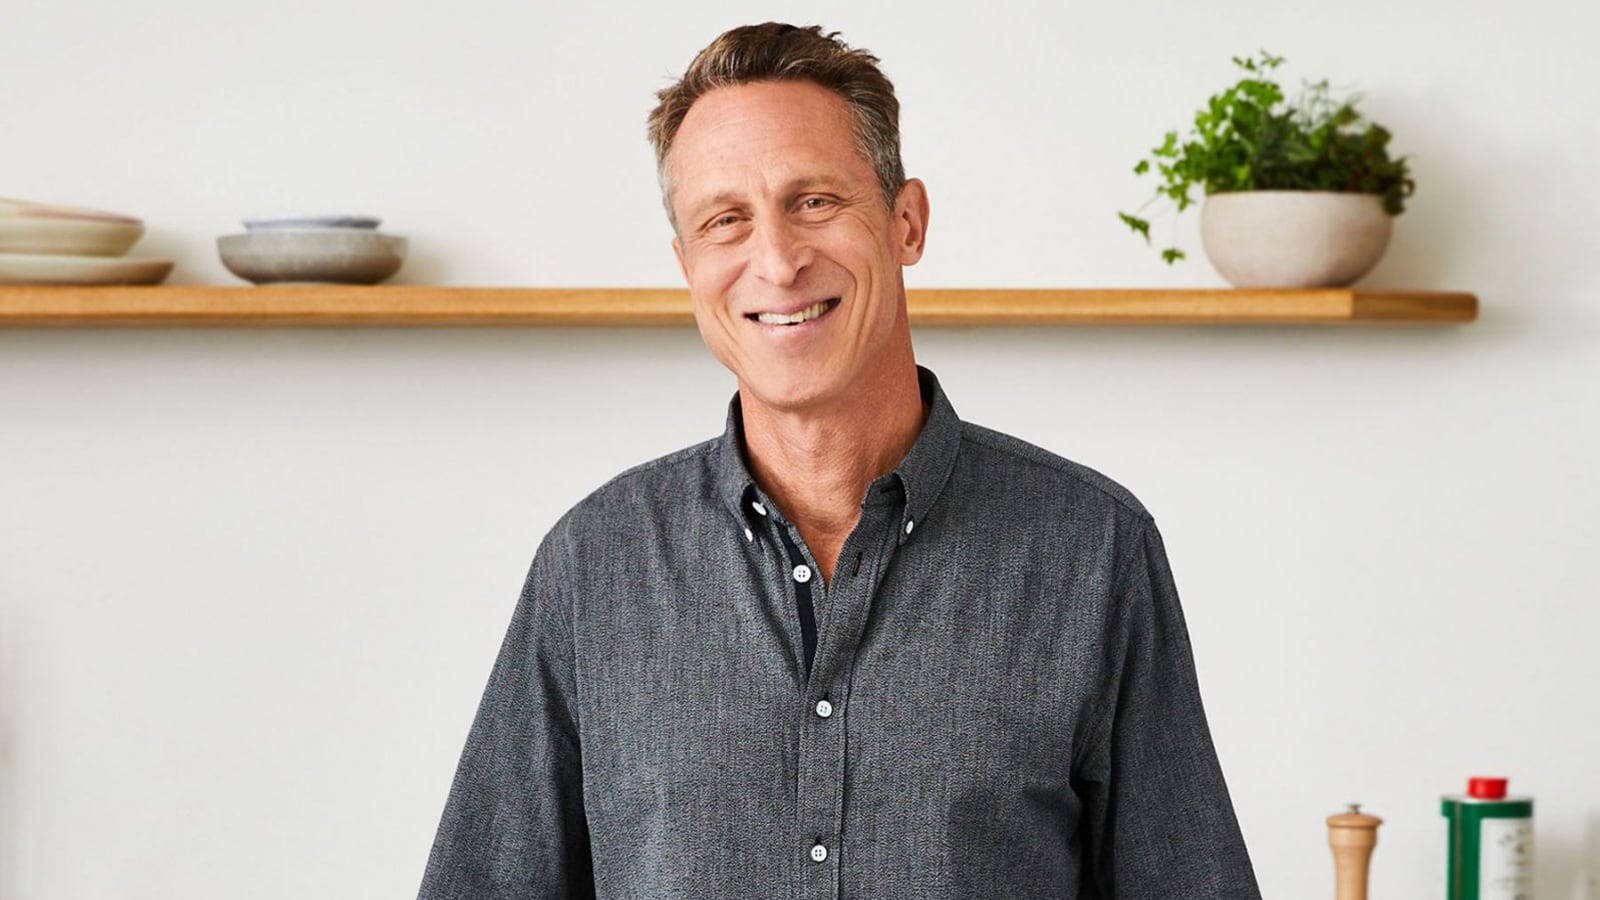 The Truth about Sugar, Fat & What Is a Healthy Diet with Dr. Mark Hyman